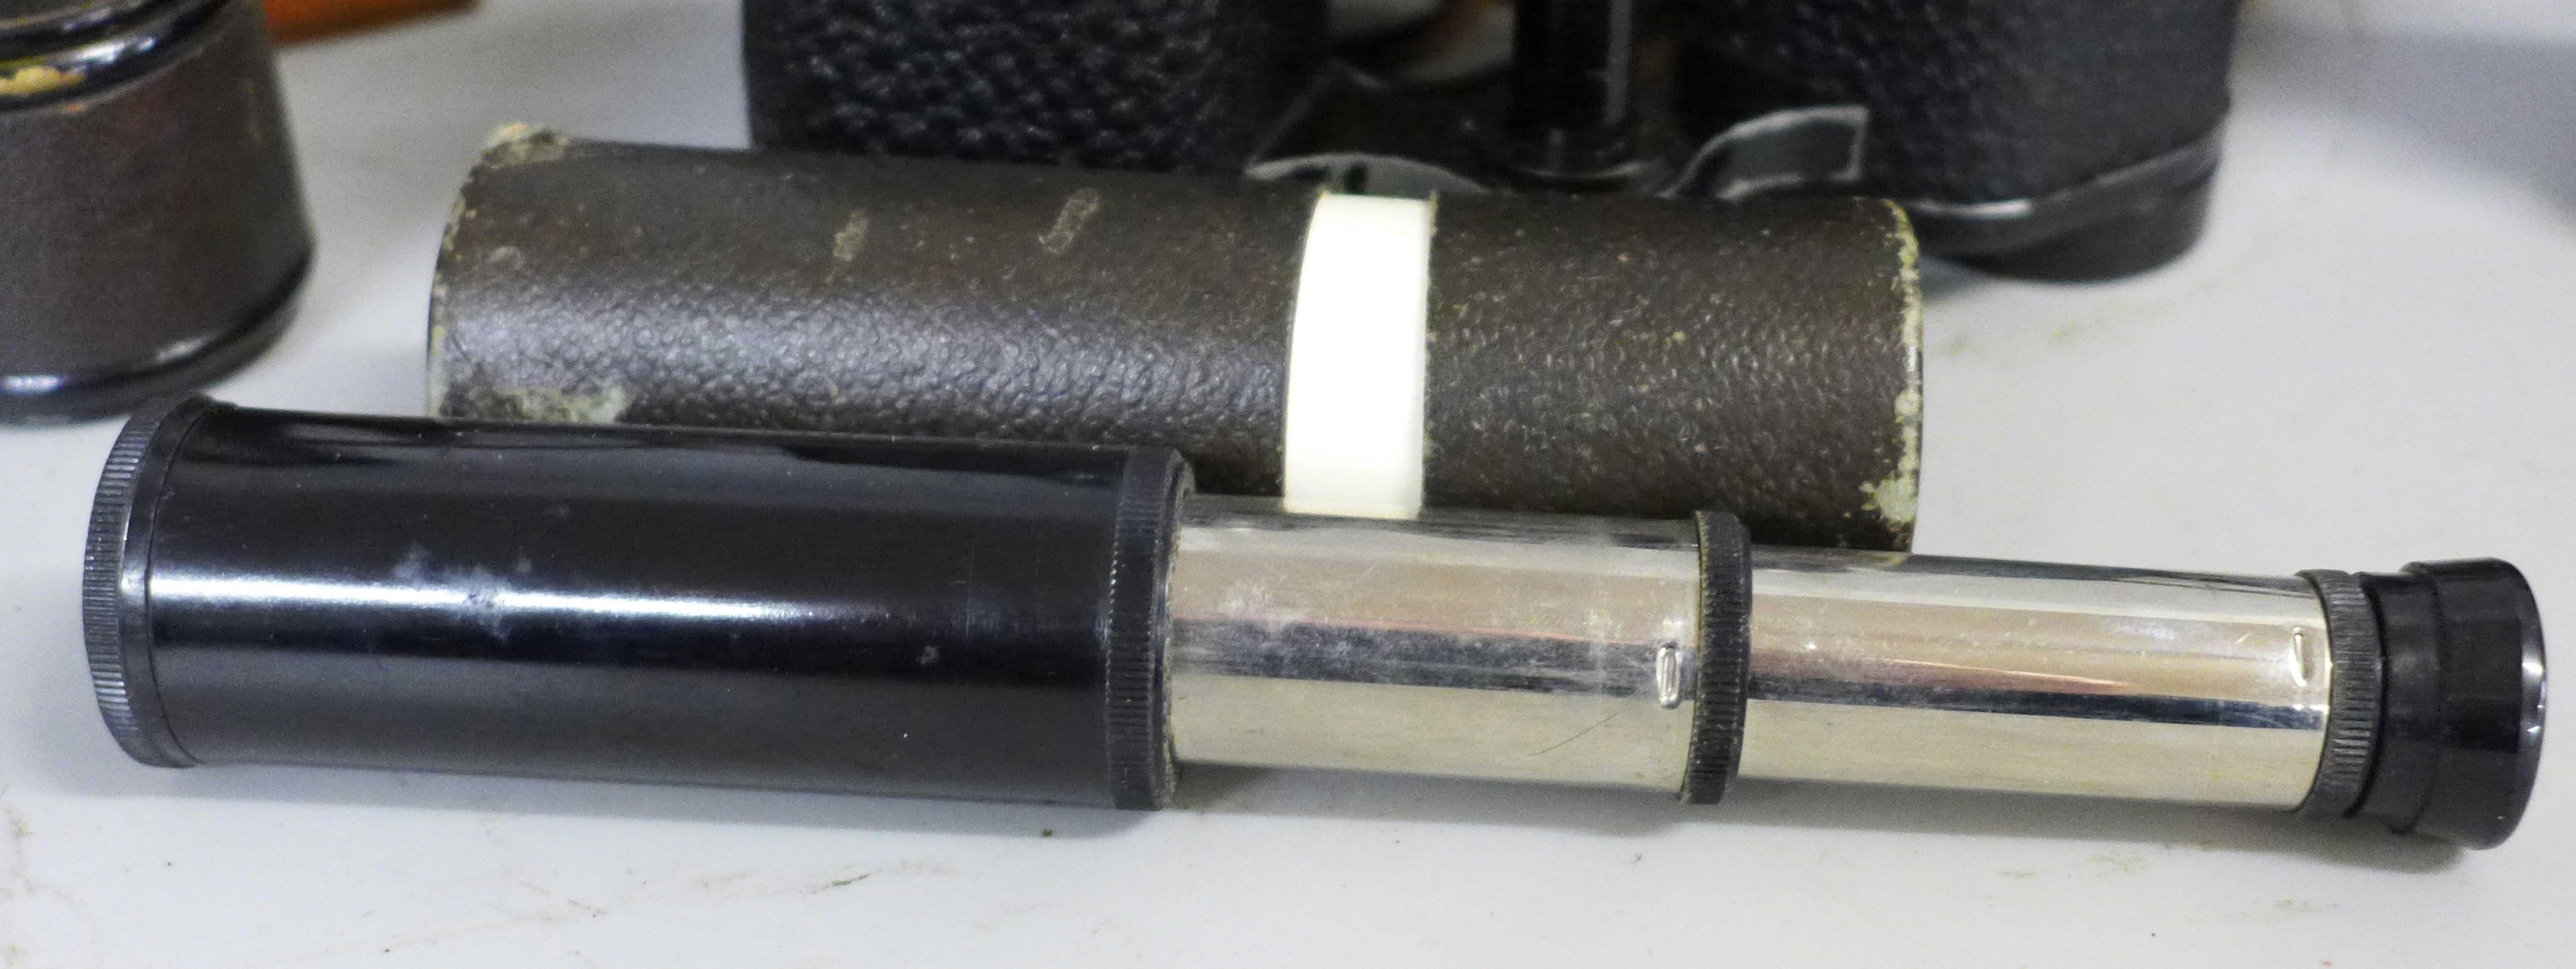 Three cased sets of field glasses and a pocket Zonex telescope - Image 5 of 5